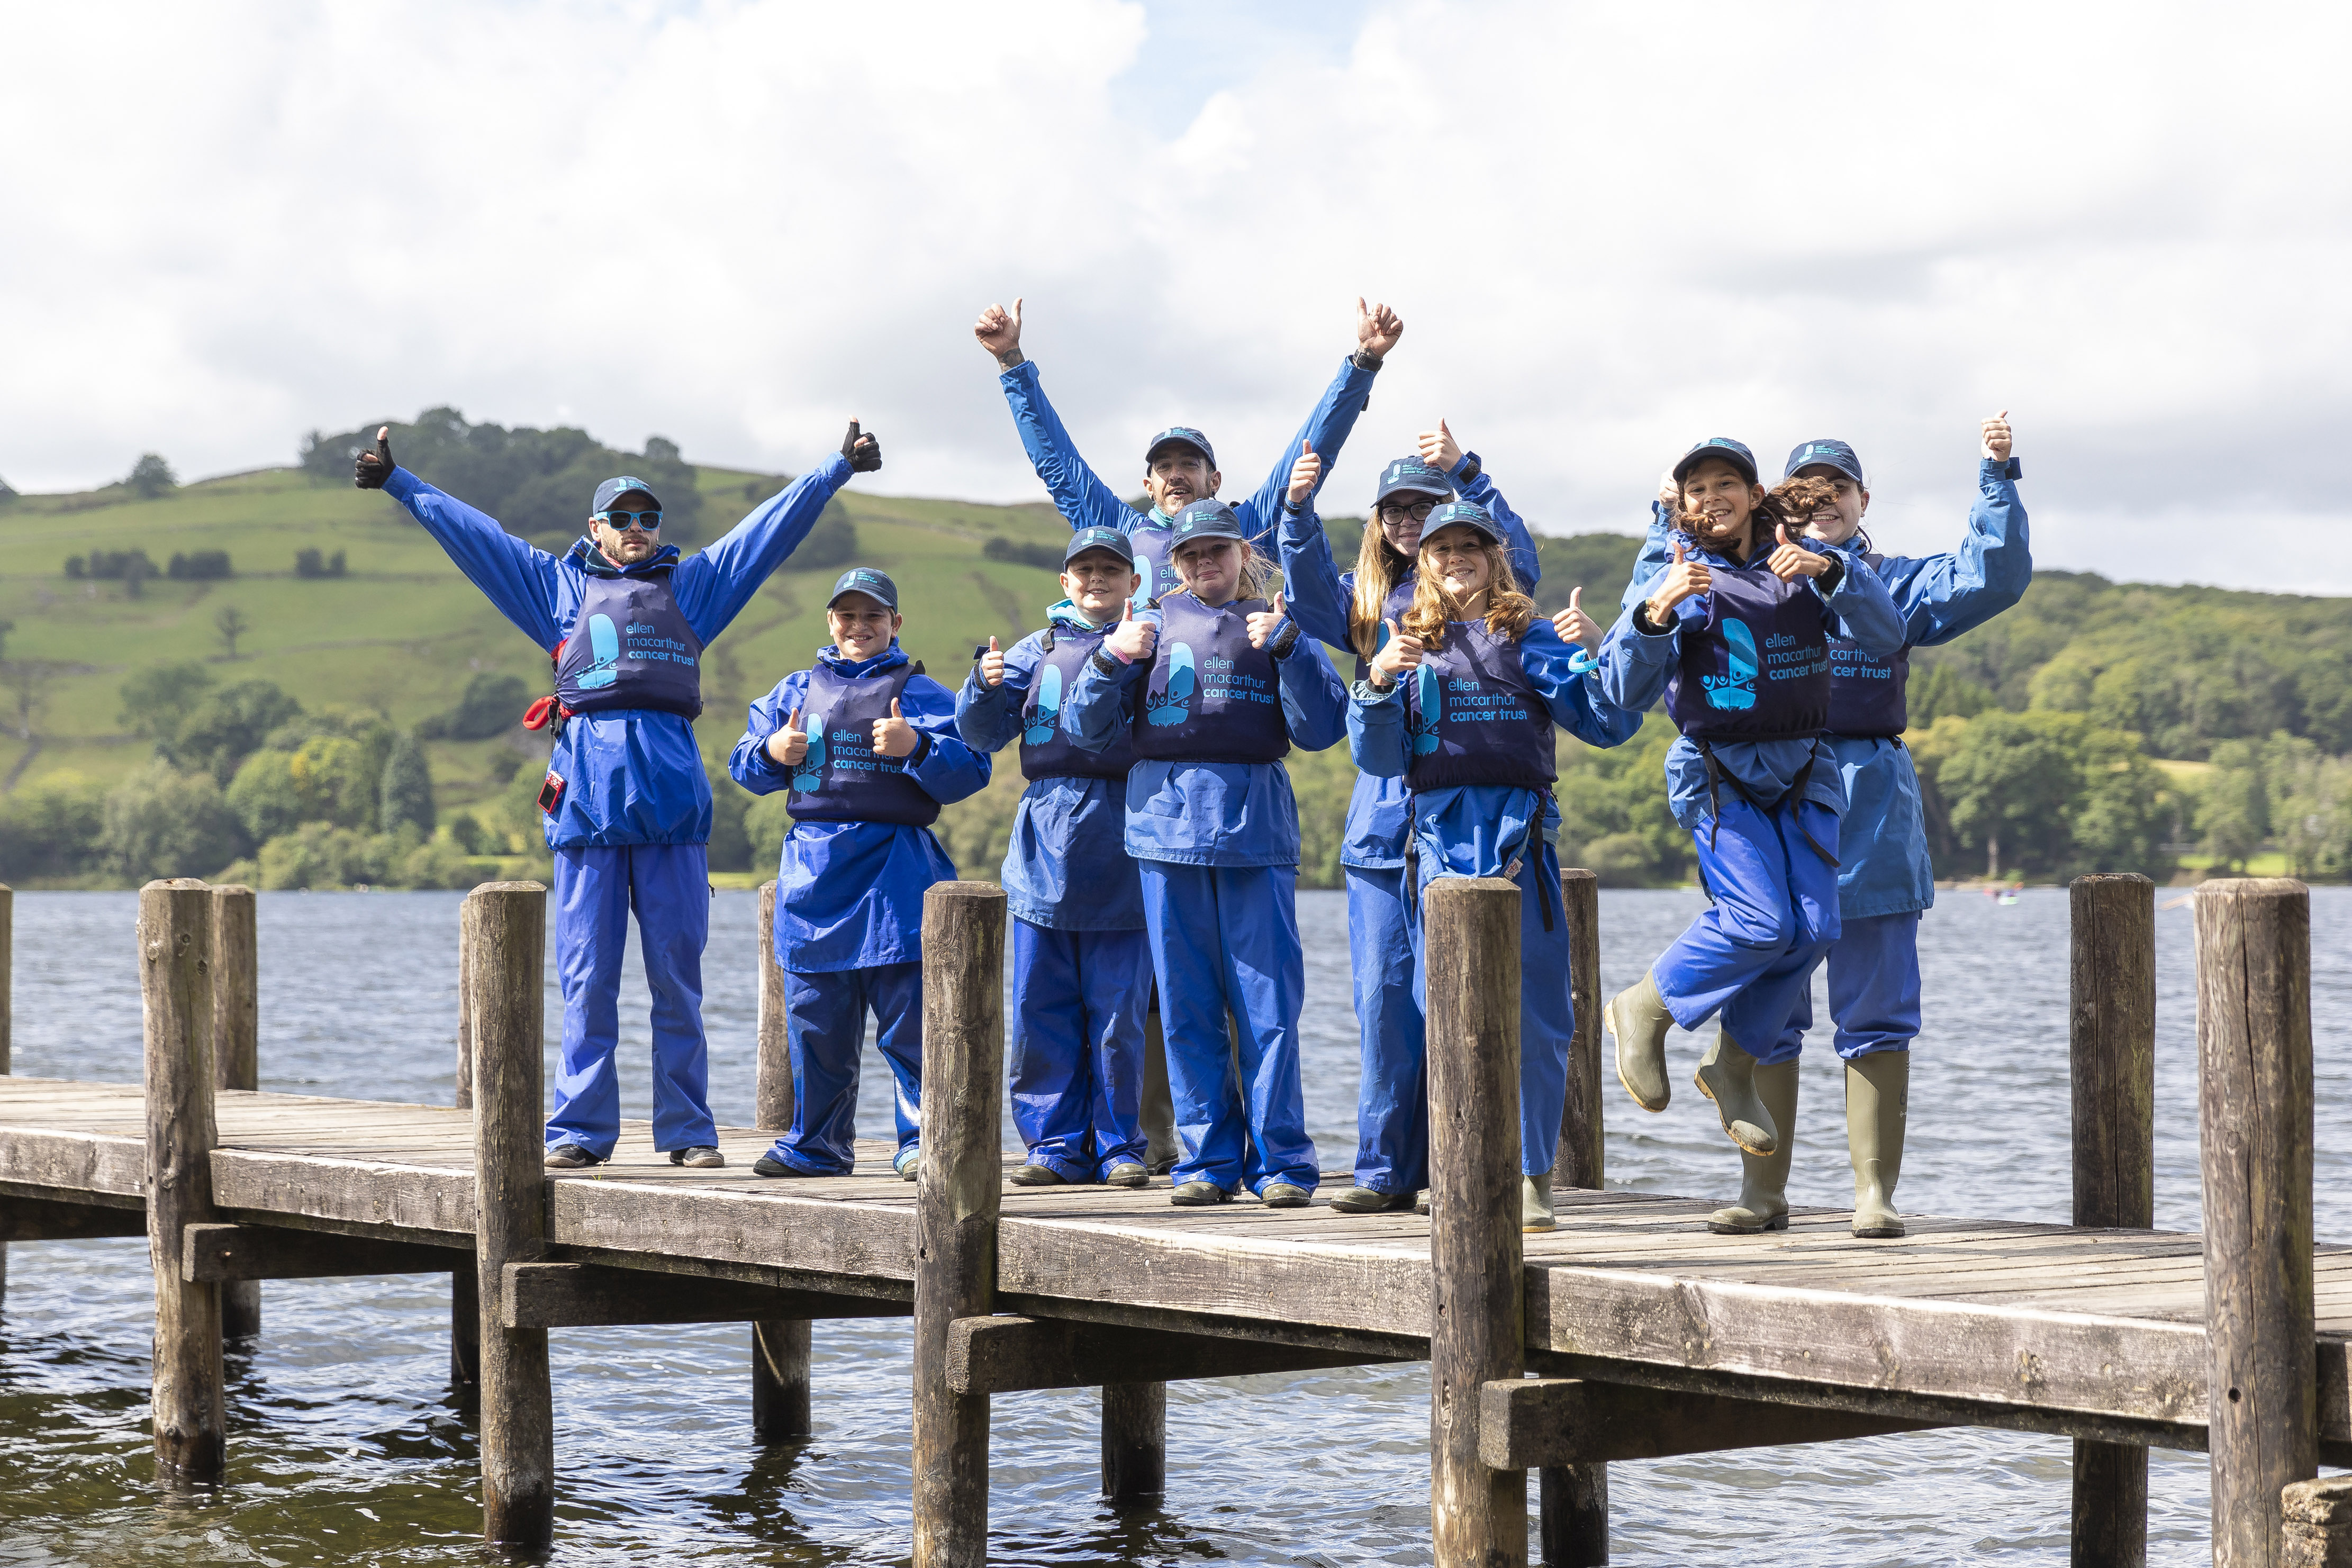 A group of young people and volunteers wearing Trust branded waterproof clothing are smiling and jumping by a lake